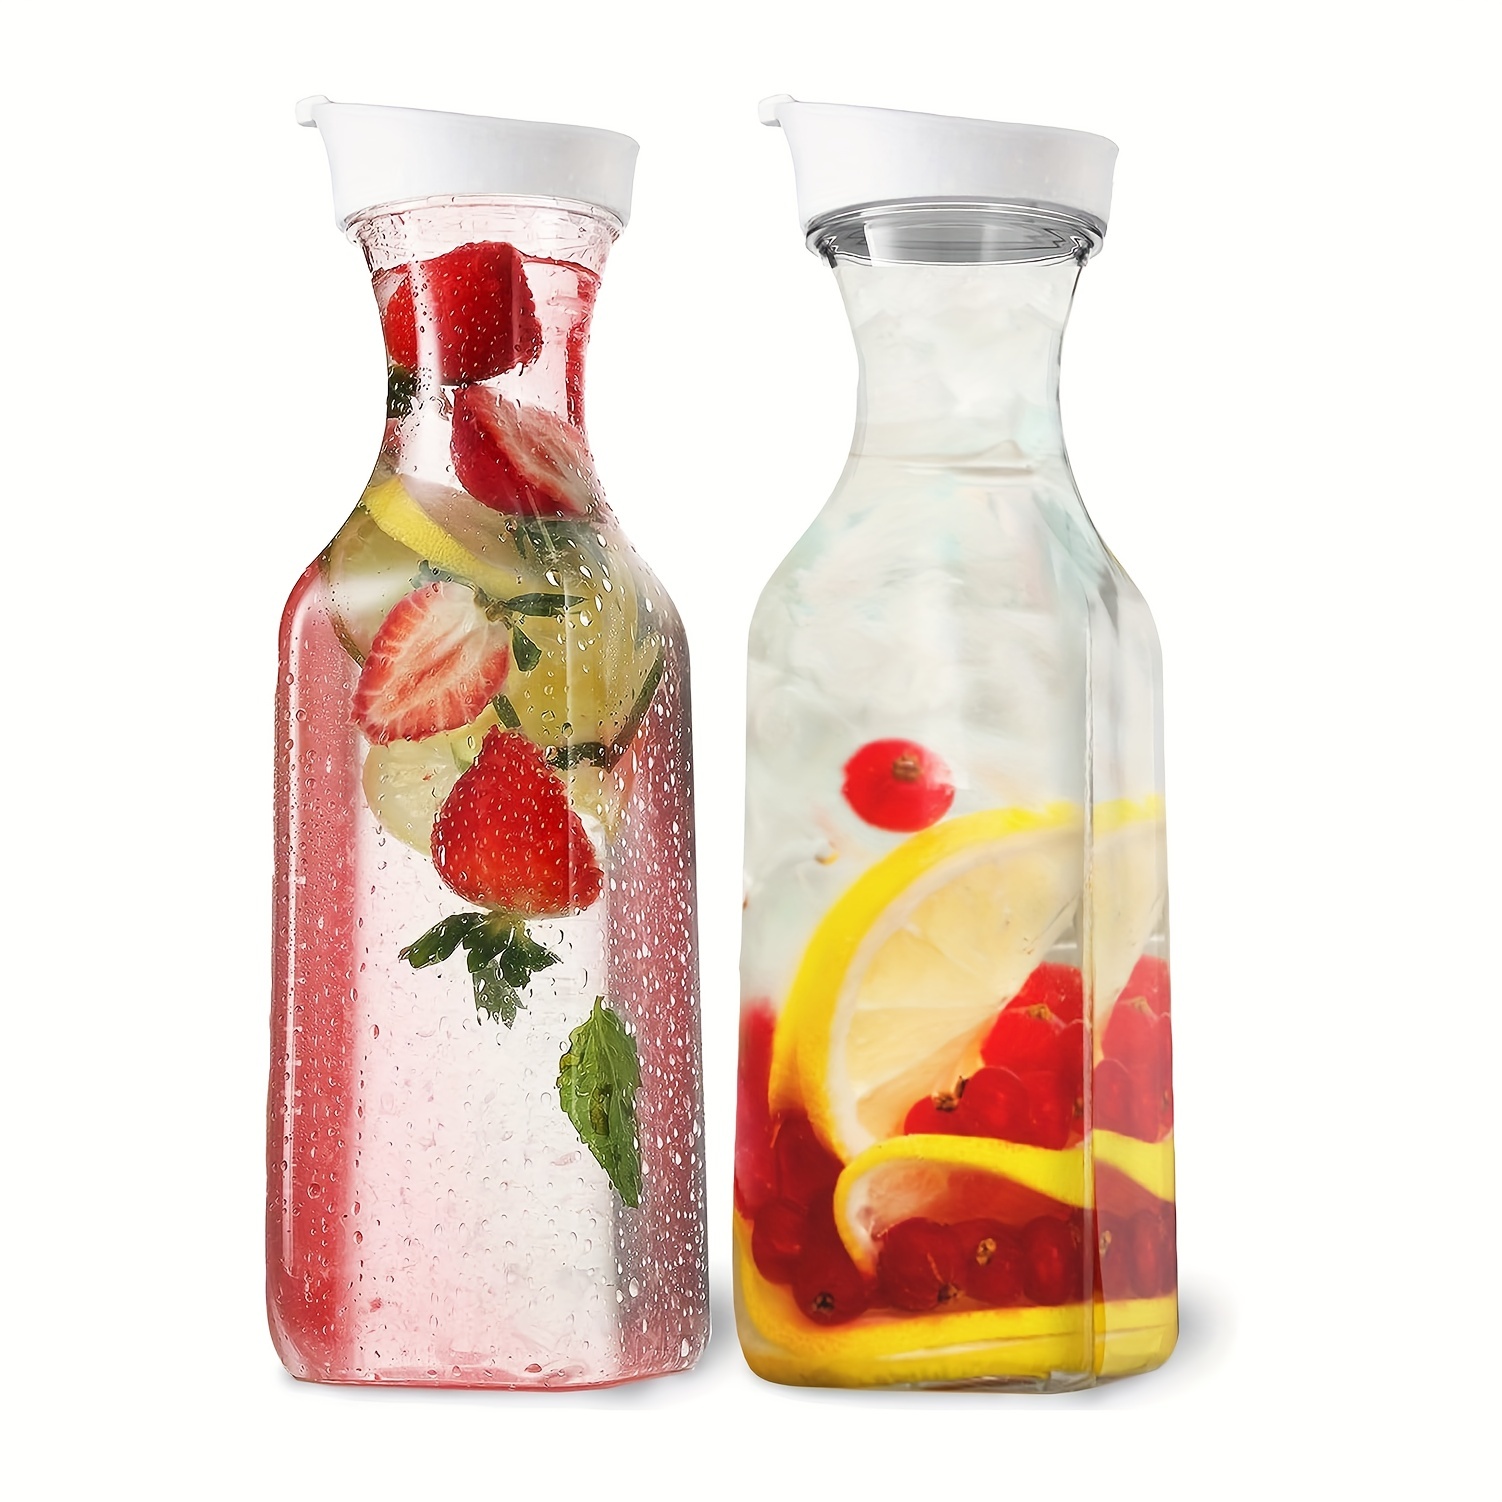 1pc, Large Capacity Bottle, Plastic Pitcher For Drinks, Milk, Smoothies,  Iced Tea, Water Pipe, Mimosa Bar Supply - Juice Container With Fridge Lid,  Home Supplies, Shop Now For Limited-time Deals